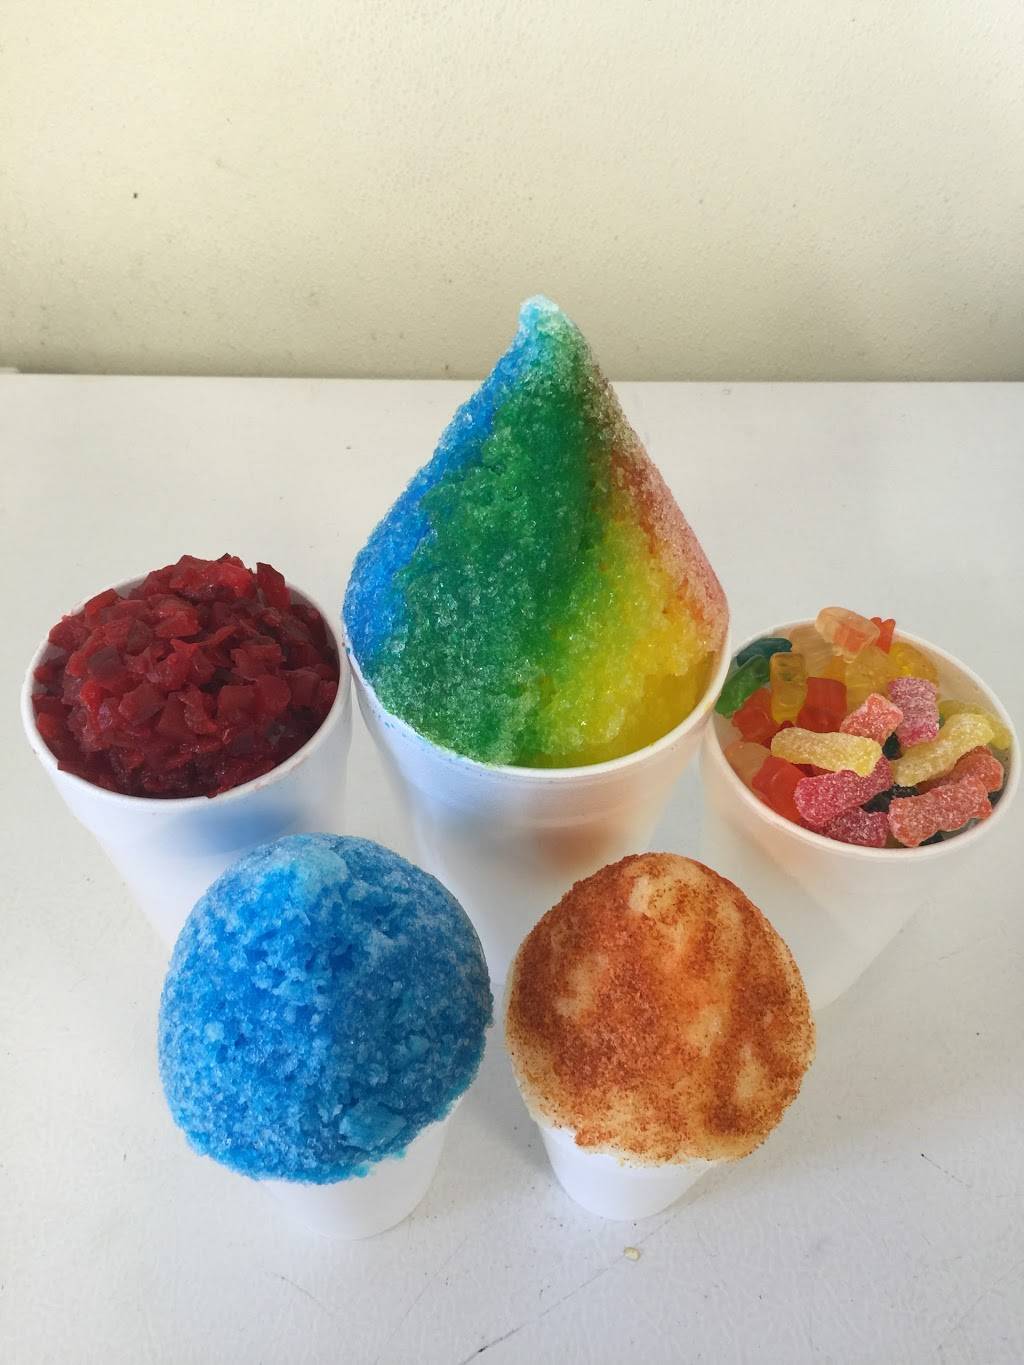 Shaved Ice & Funnel Cake #1 | restaurant | 9185 Bruton Rd, Dallas, TX 75227, USA | 2148108595 OR +1 214-810-8595